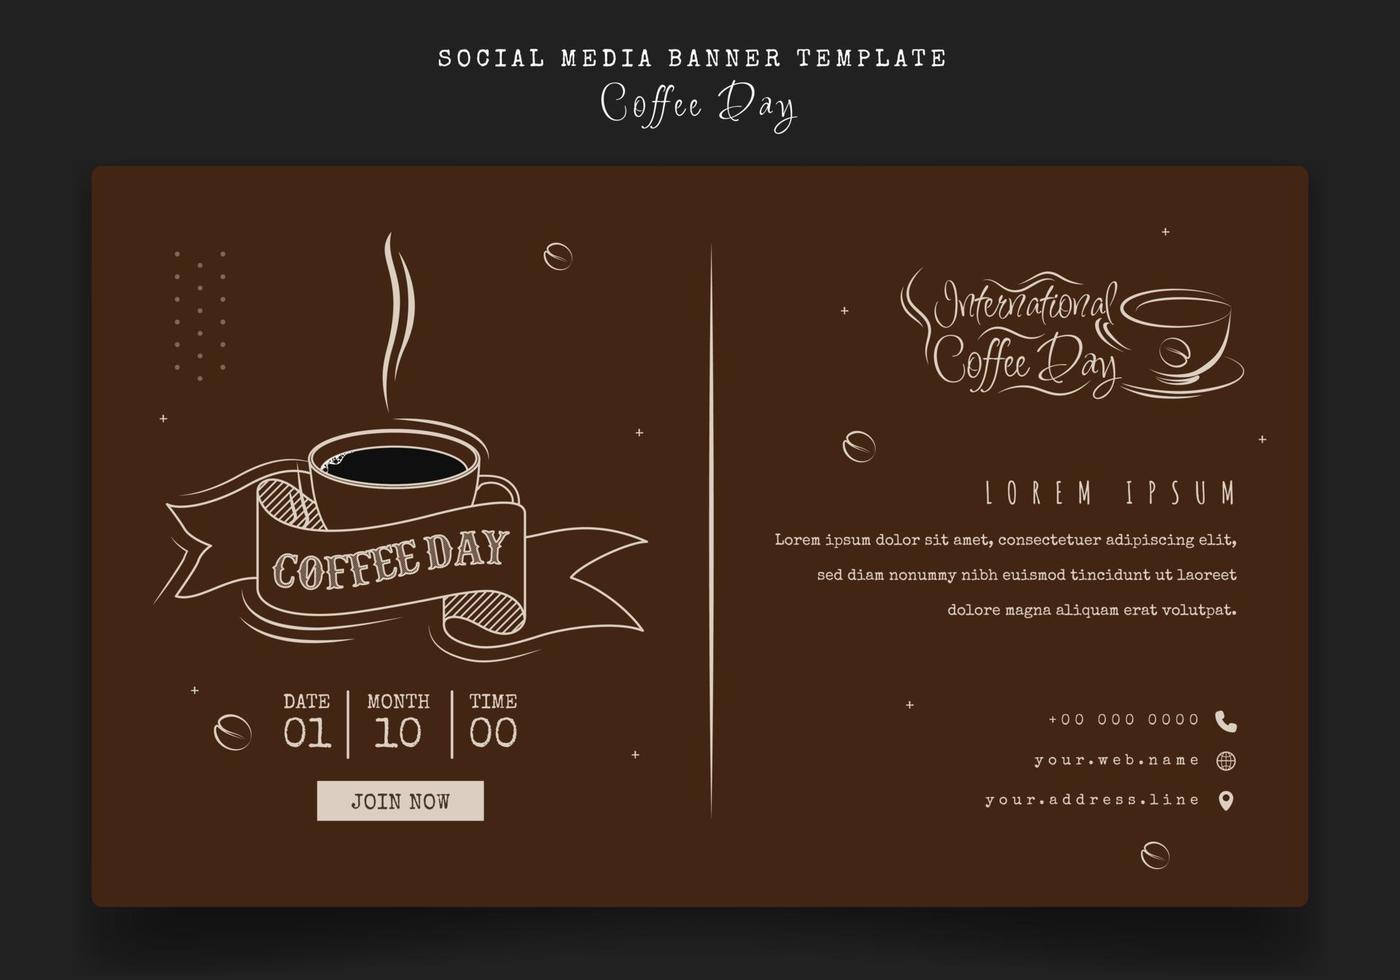 Banner template in brown background with coffee design for coffee day campaign vector